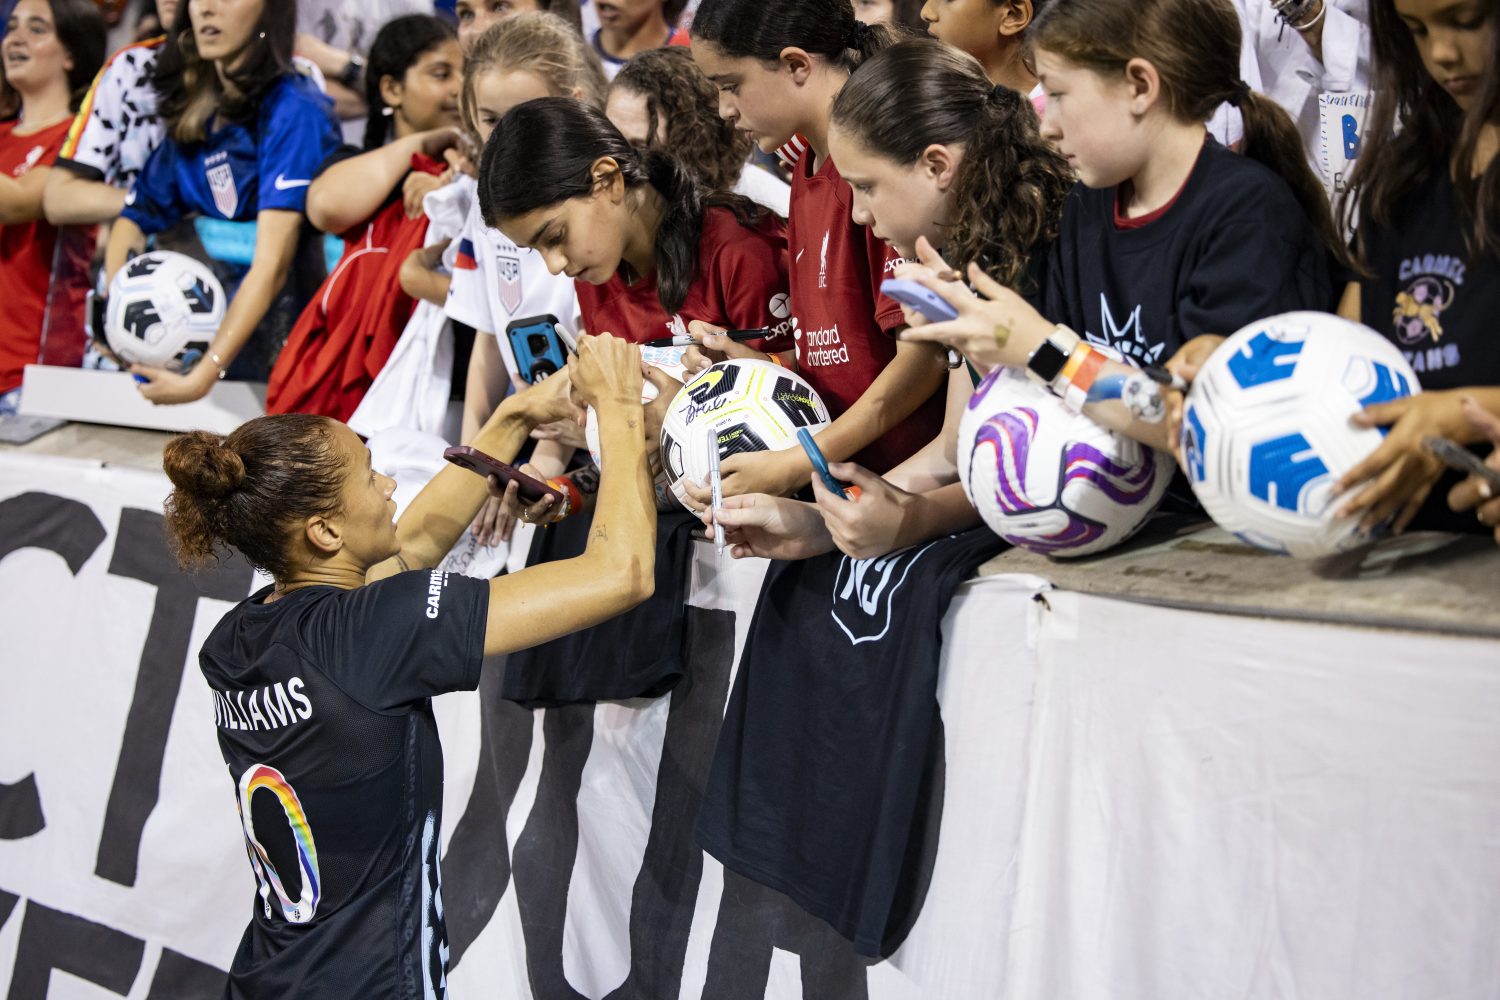 HARRISON, NEW JERSEY - JUNE 25: Lynn Williams #10 of NJ/NY Gotham FC signs autographs for fans at the 2023 FIFA World Cup Send Off before she heads out for the FIFA World Cup and after the National Womens Soccer League Match against the Chicago Red Stars at Red Bull Arena on June 25, 2023 in Harrison, New Jersey. (Photo by Ira L. Black - Corbis/Getty Images)